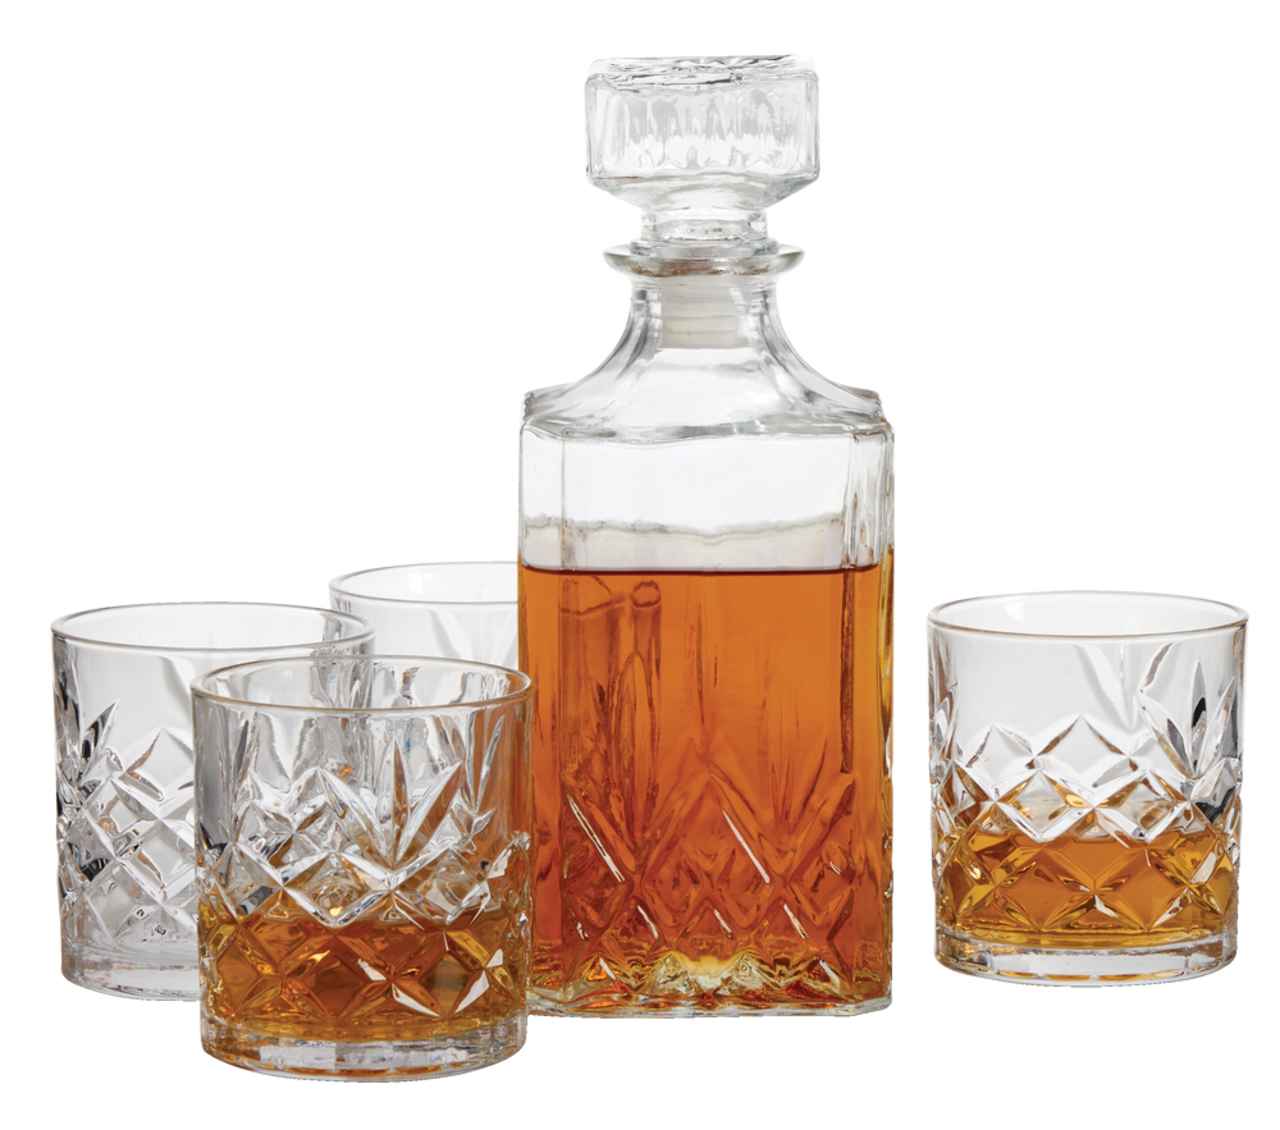 https://media-www.canadiantire.ca/product/living/kitchen/dining-and-entertaining/1426174/trudeau-whiskey-set-5-pc-19b99451-15bf-4b77-b69f-9d77f38abab3.png?imdensity=1&imwidth=640&impolicy=mZoom